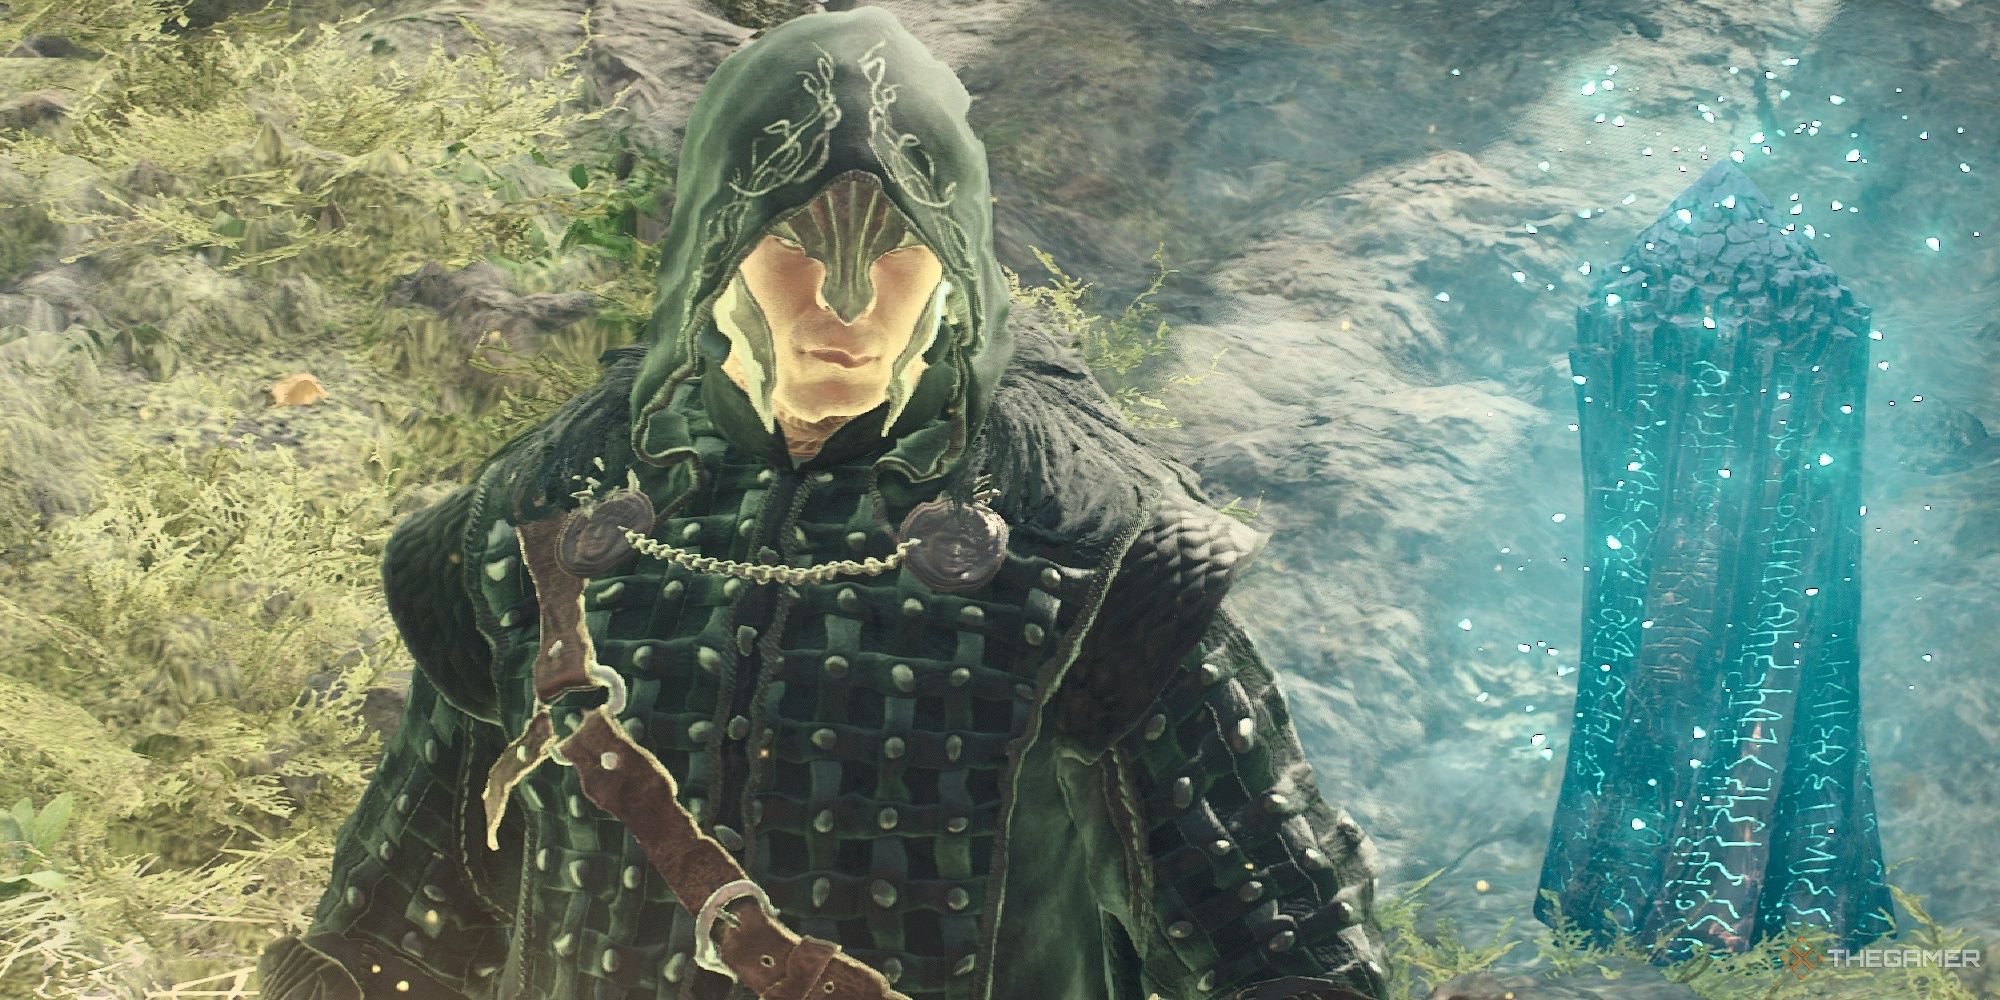 The Arisen stands beside a Portcrystal in Dragon's Dogma 2.